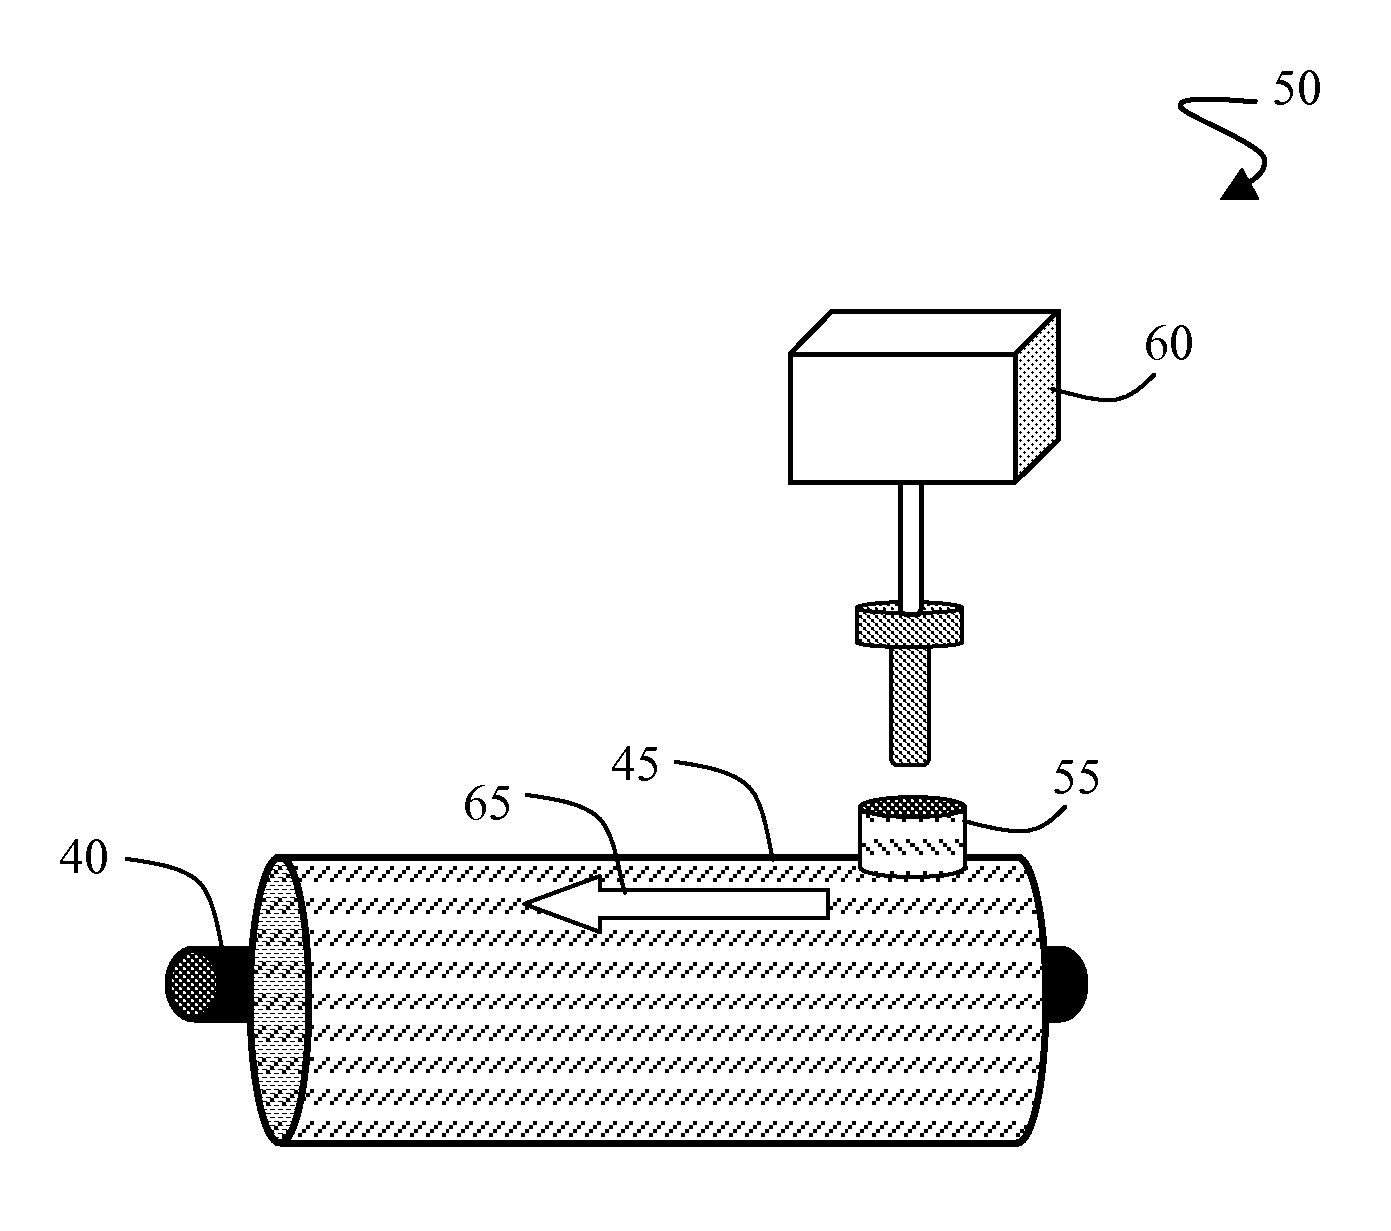 System and Method for Spectrophotometric Measurement of Total Alkalinity Using a Liquid Core Waveguide